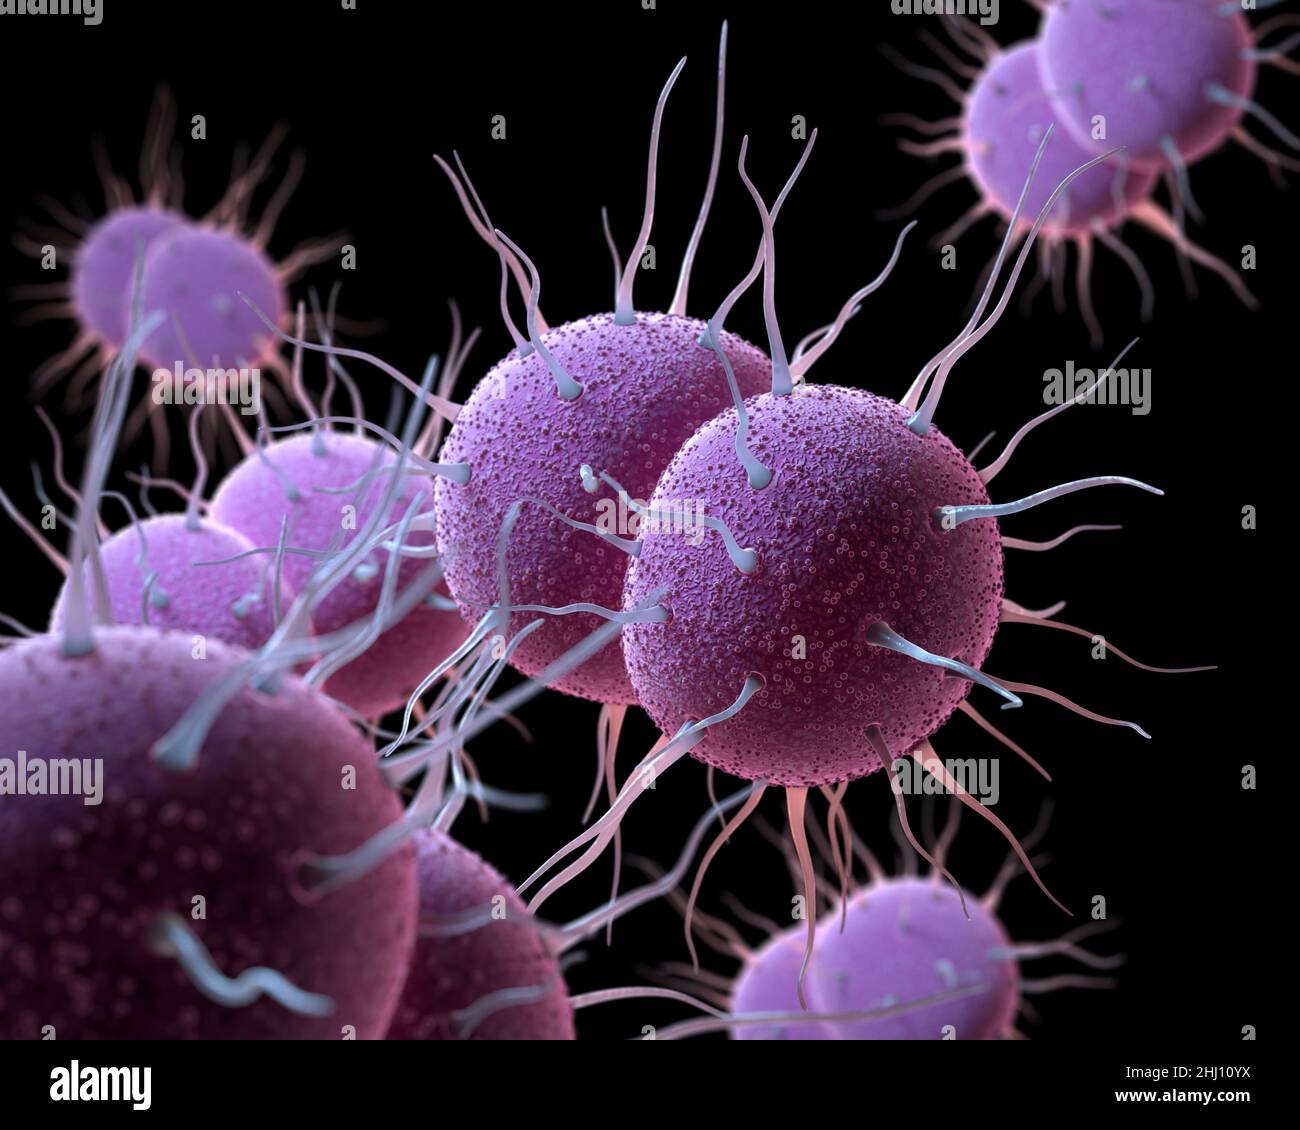 Neisseria gonorrhoeae, the bacterium responsible for the sexually transmitted infection Gonorrhea. 3D illustration Stock Photo